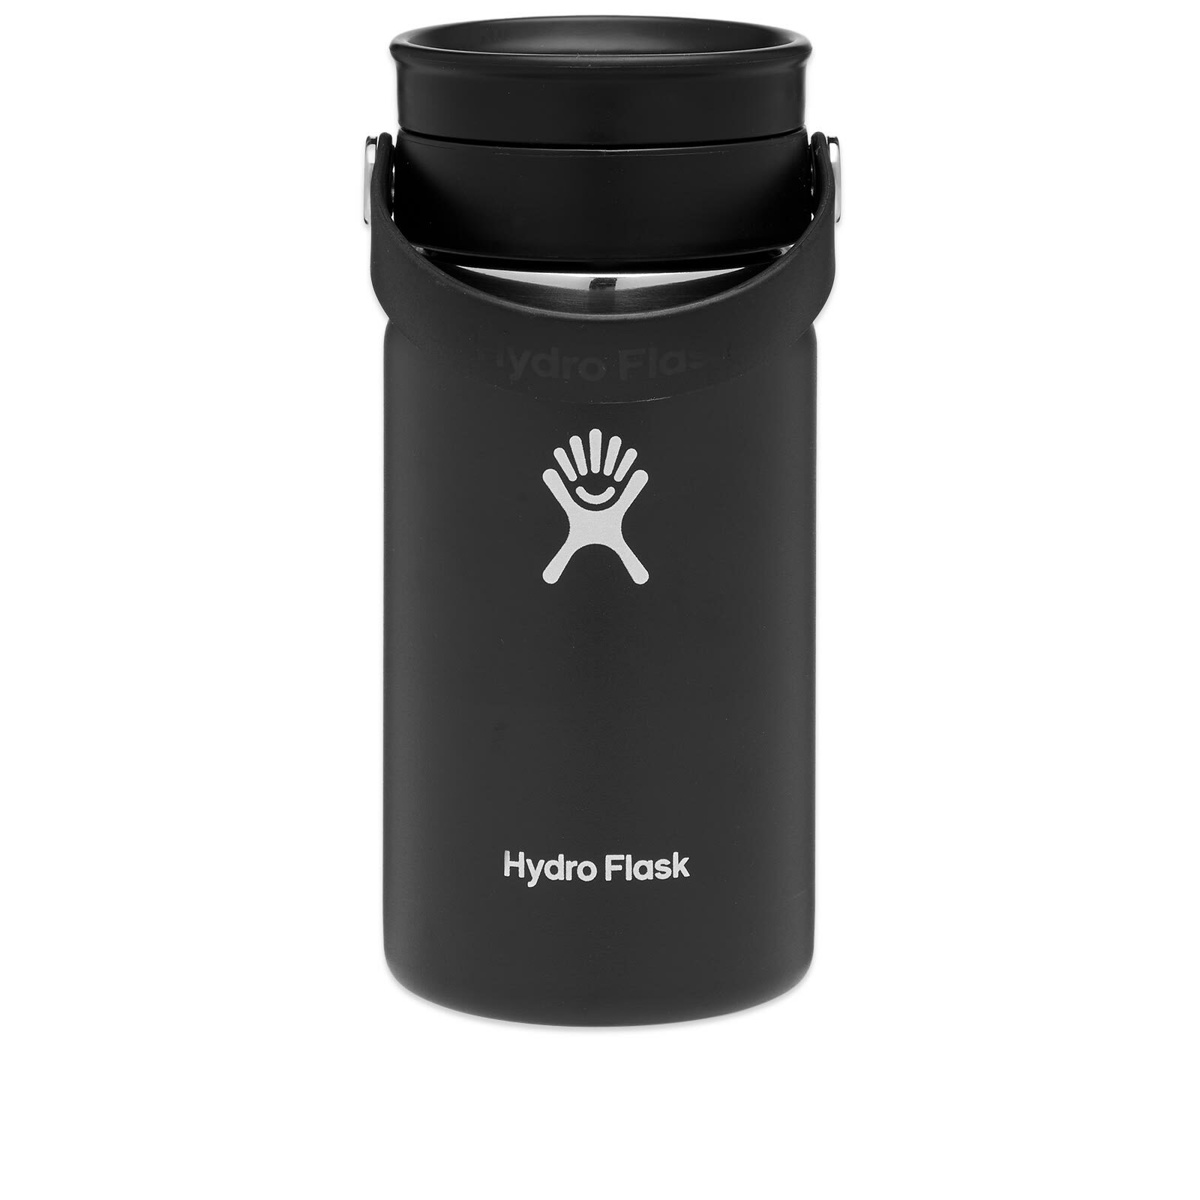 Hydro Flask 12 Oz Coffee Cup with Flex Sip Lid - White